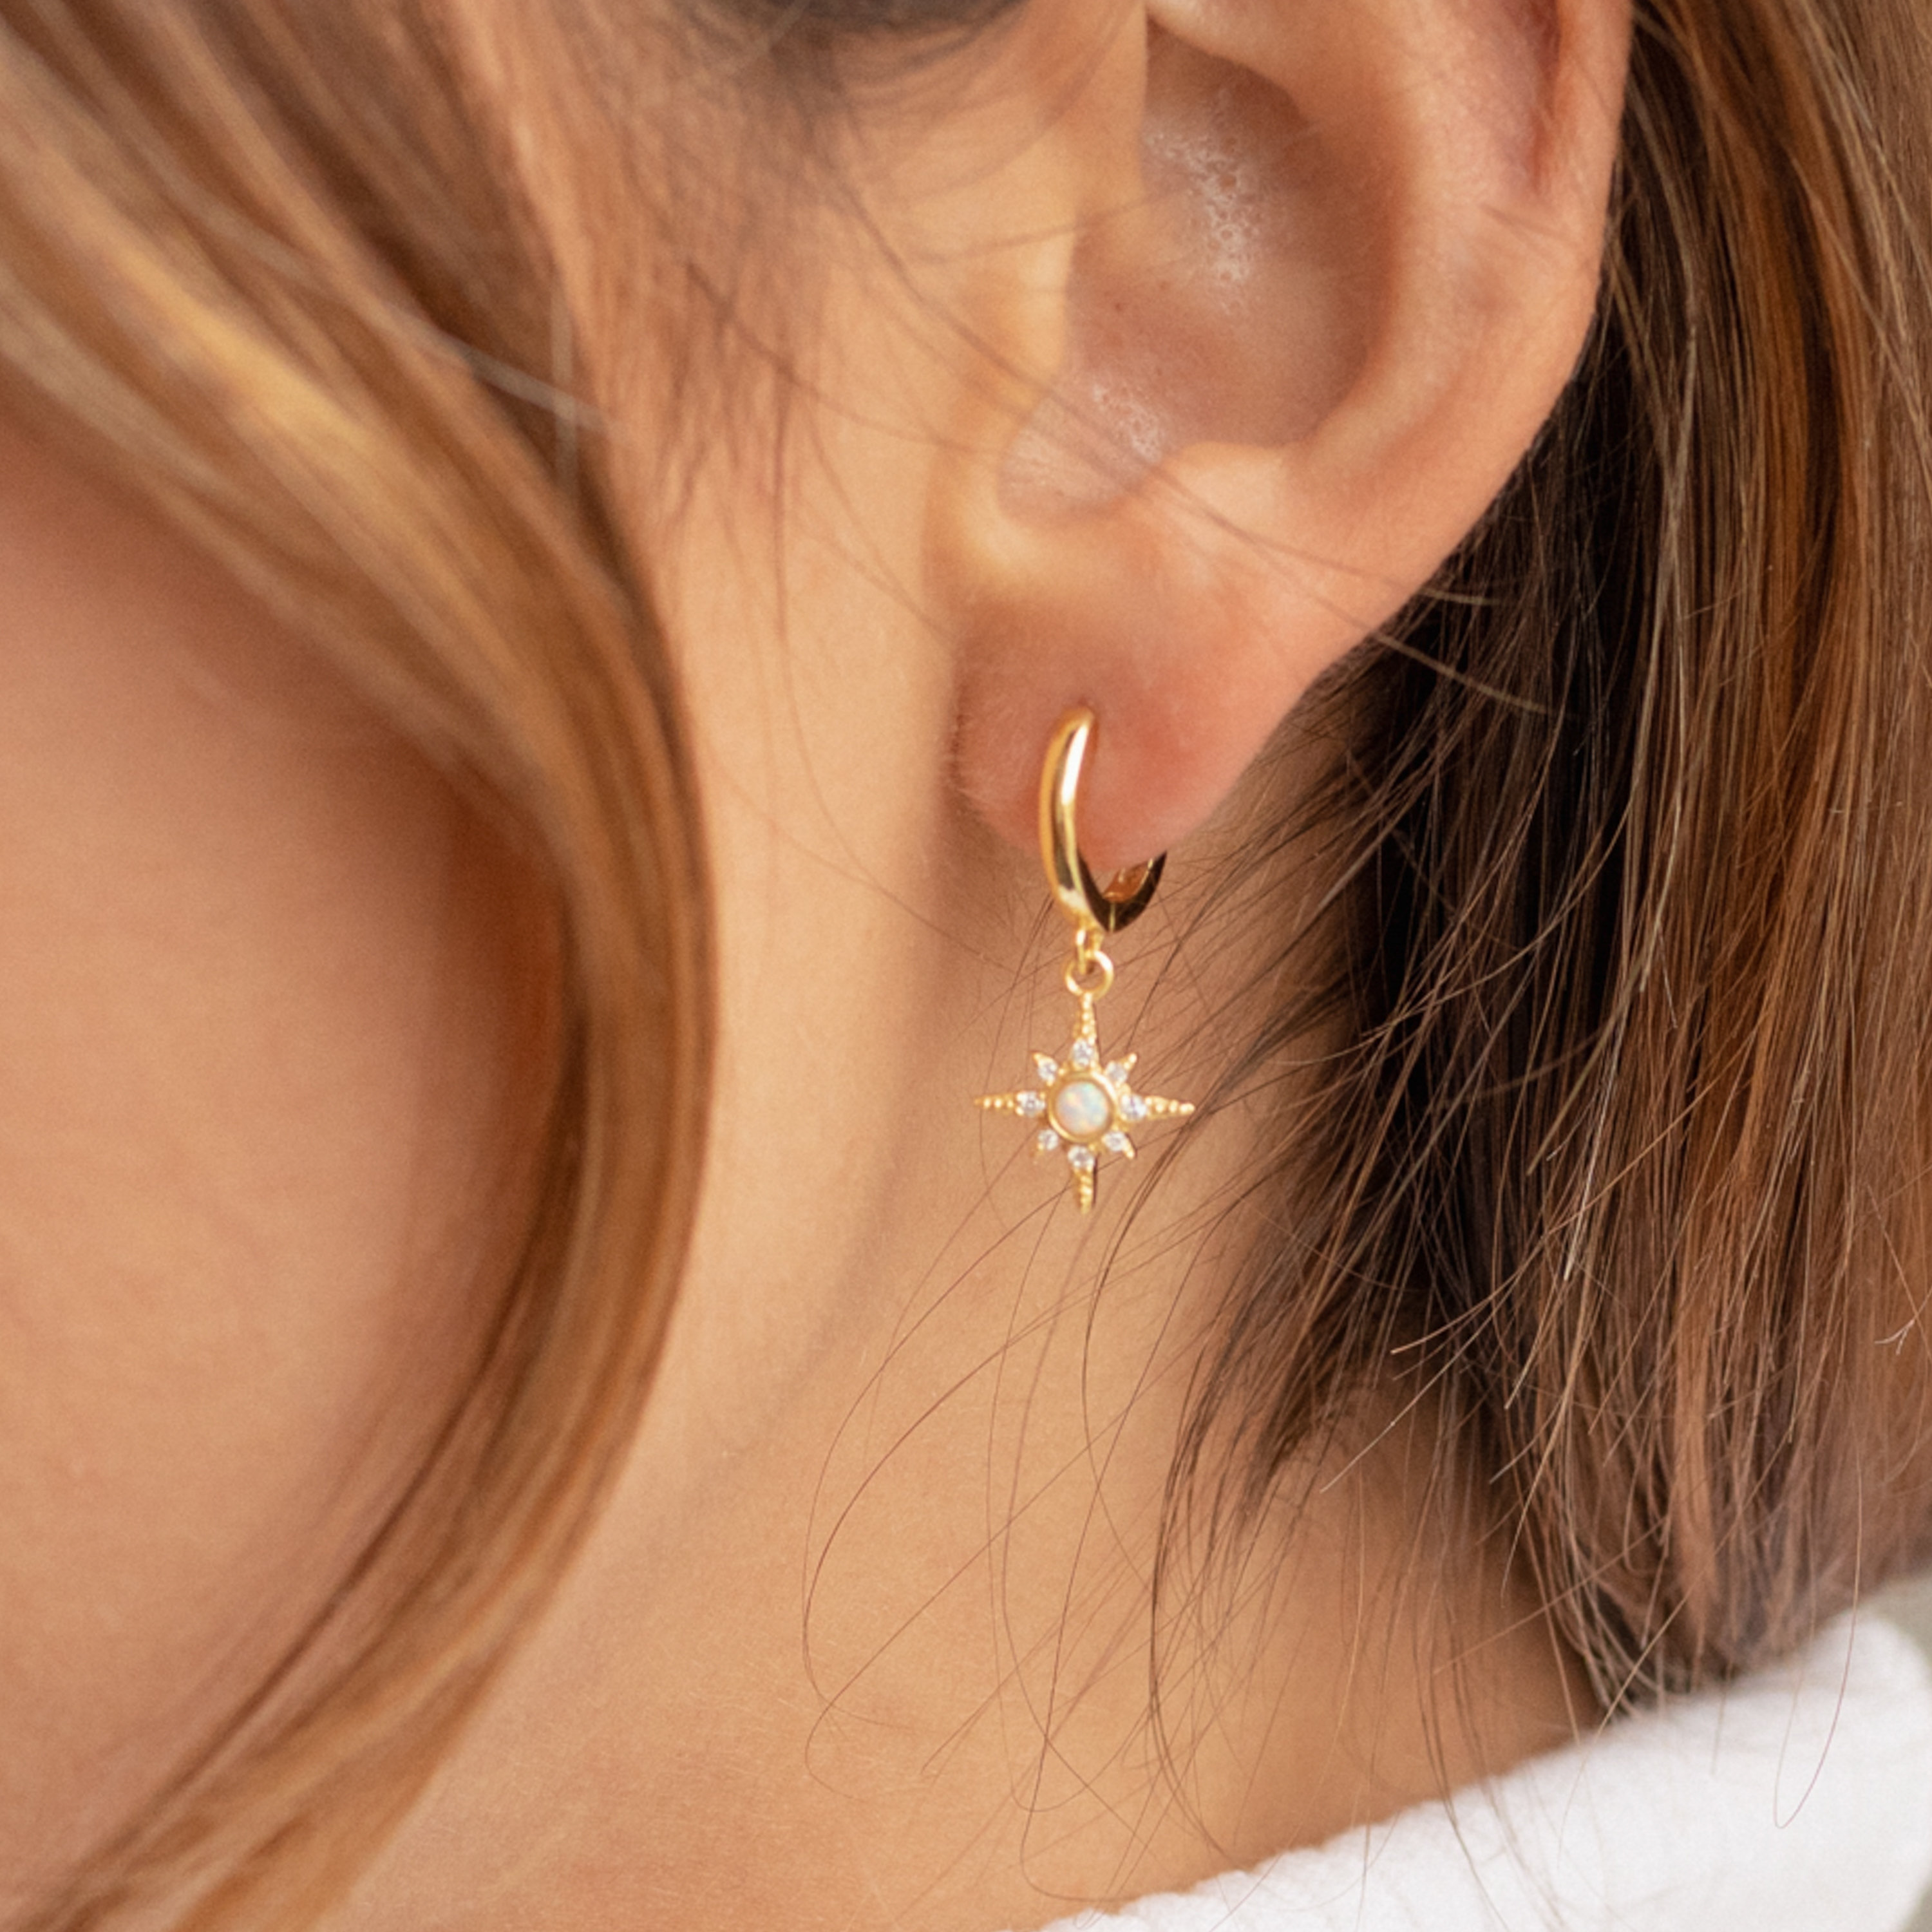 Star Ear Cuff Chain Earrings by Caitlyn Minimalist Pave -  Norway